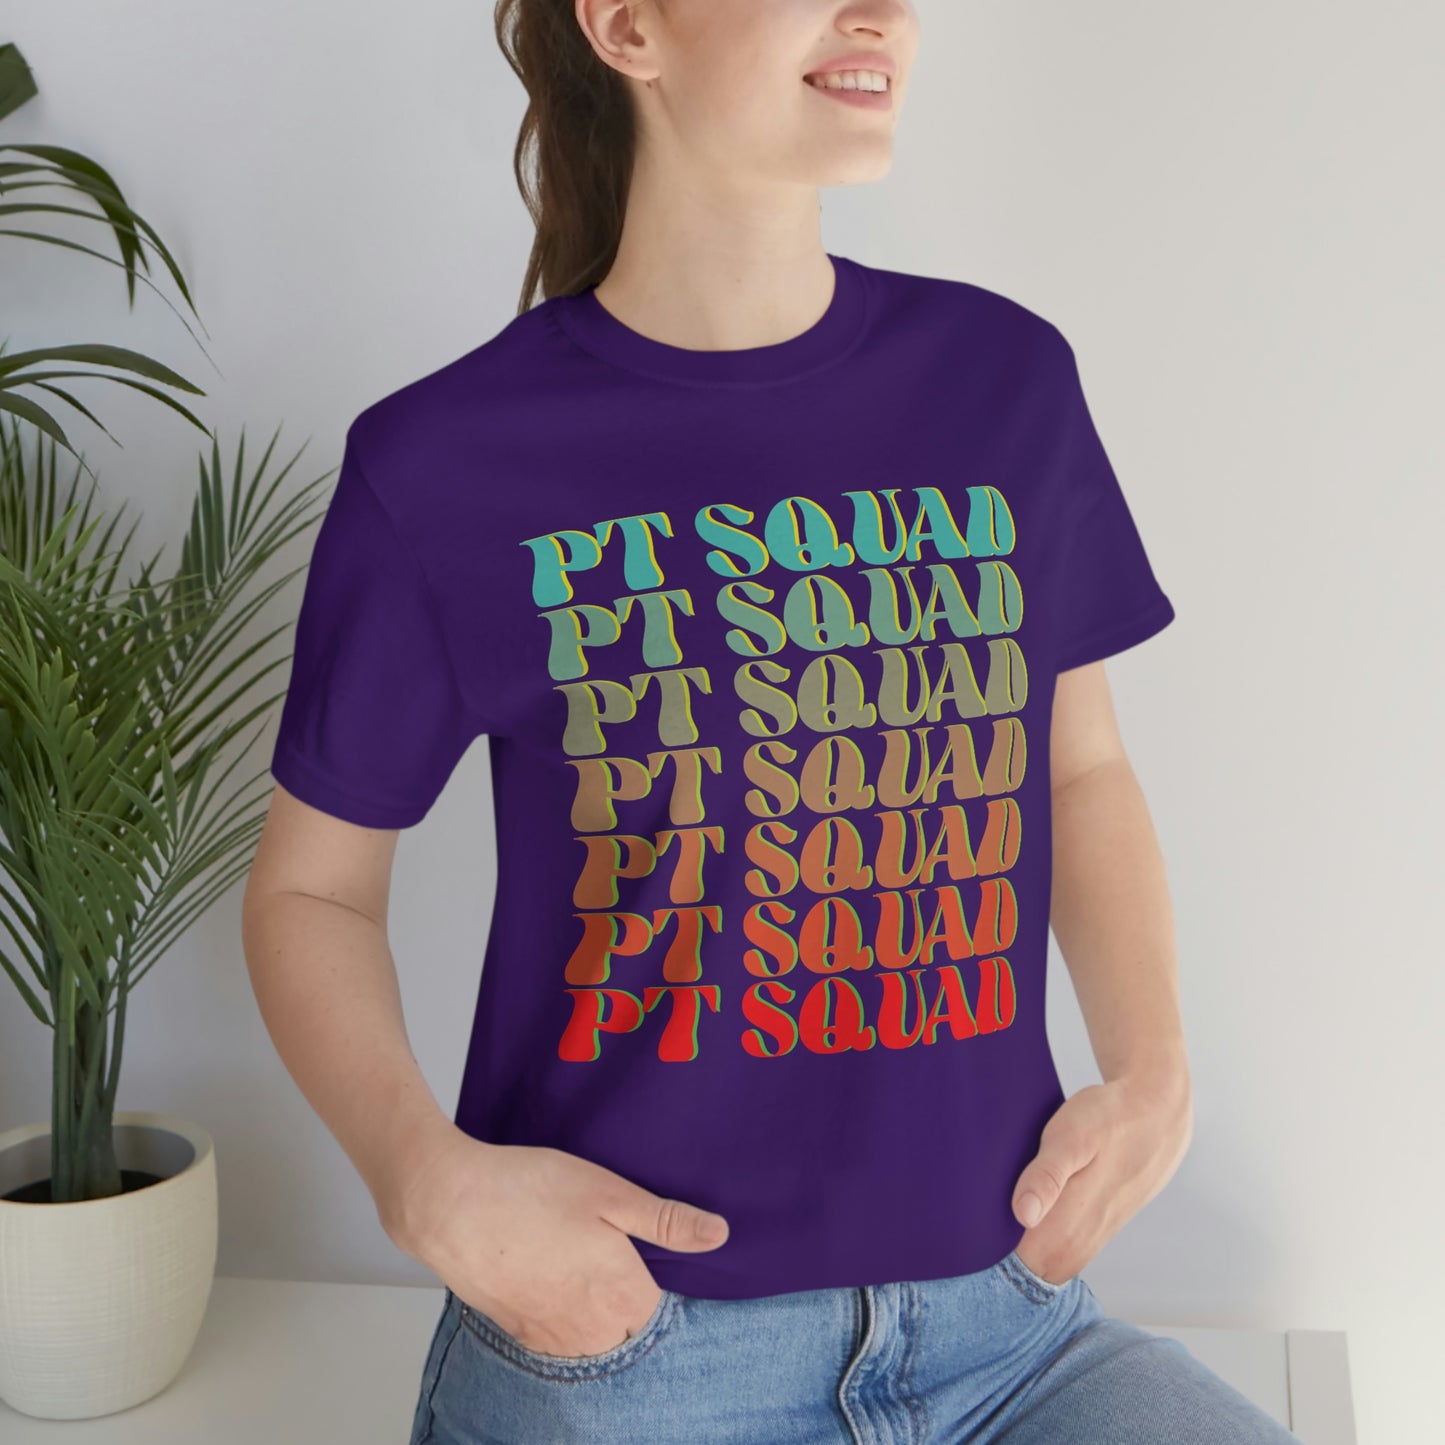 PT Squad Physycal Therapy Shirt